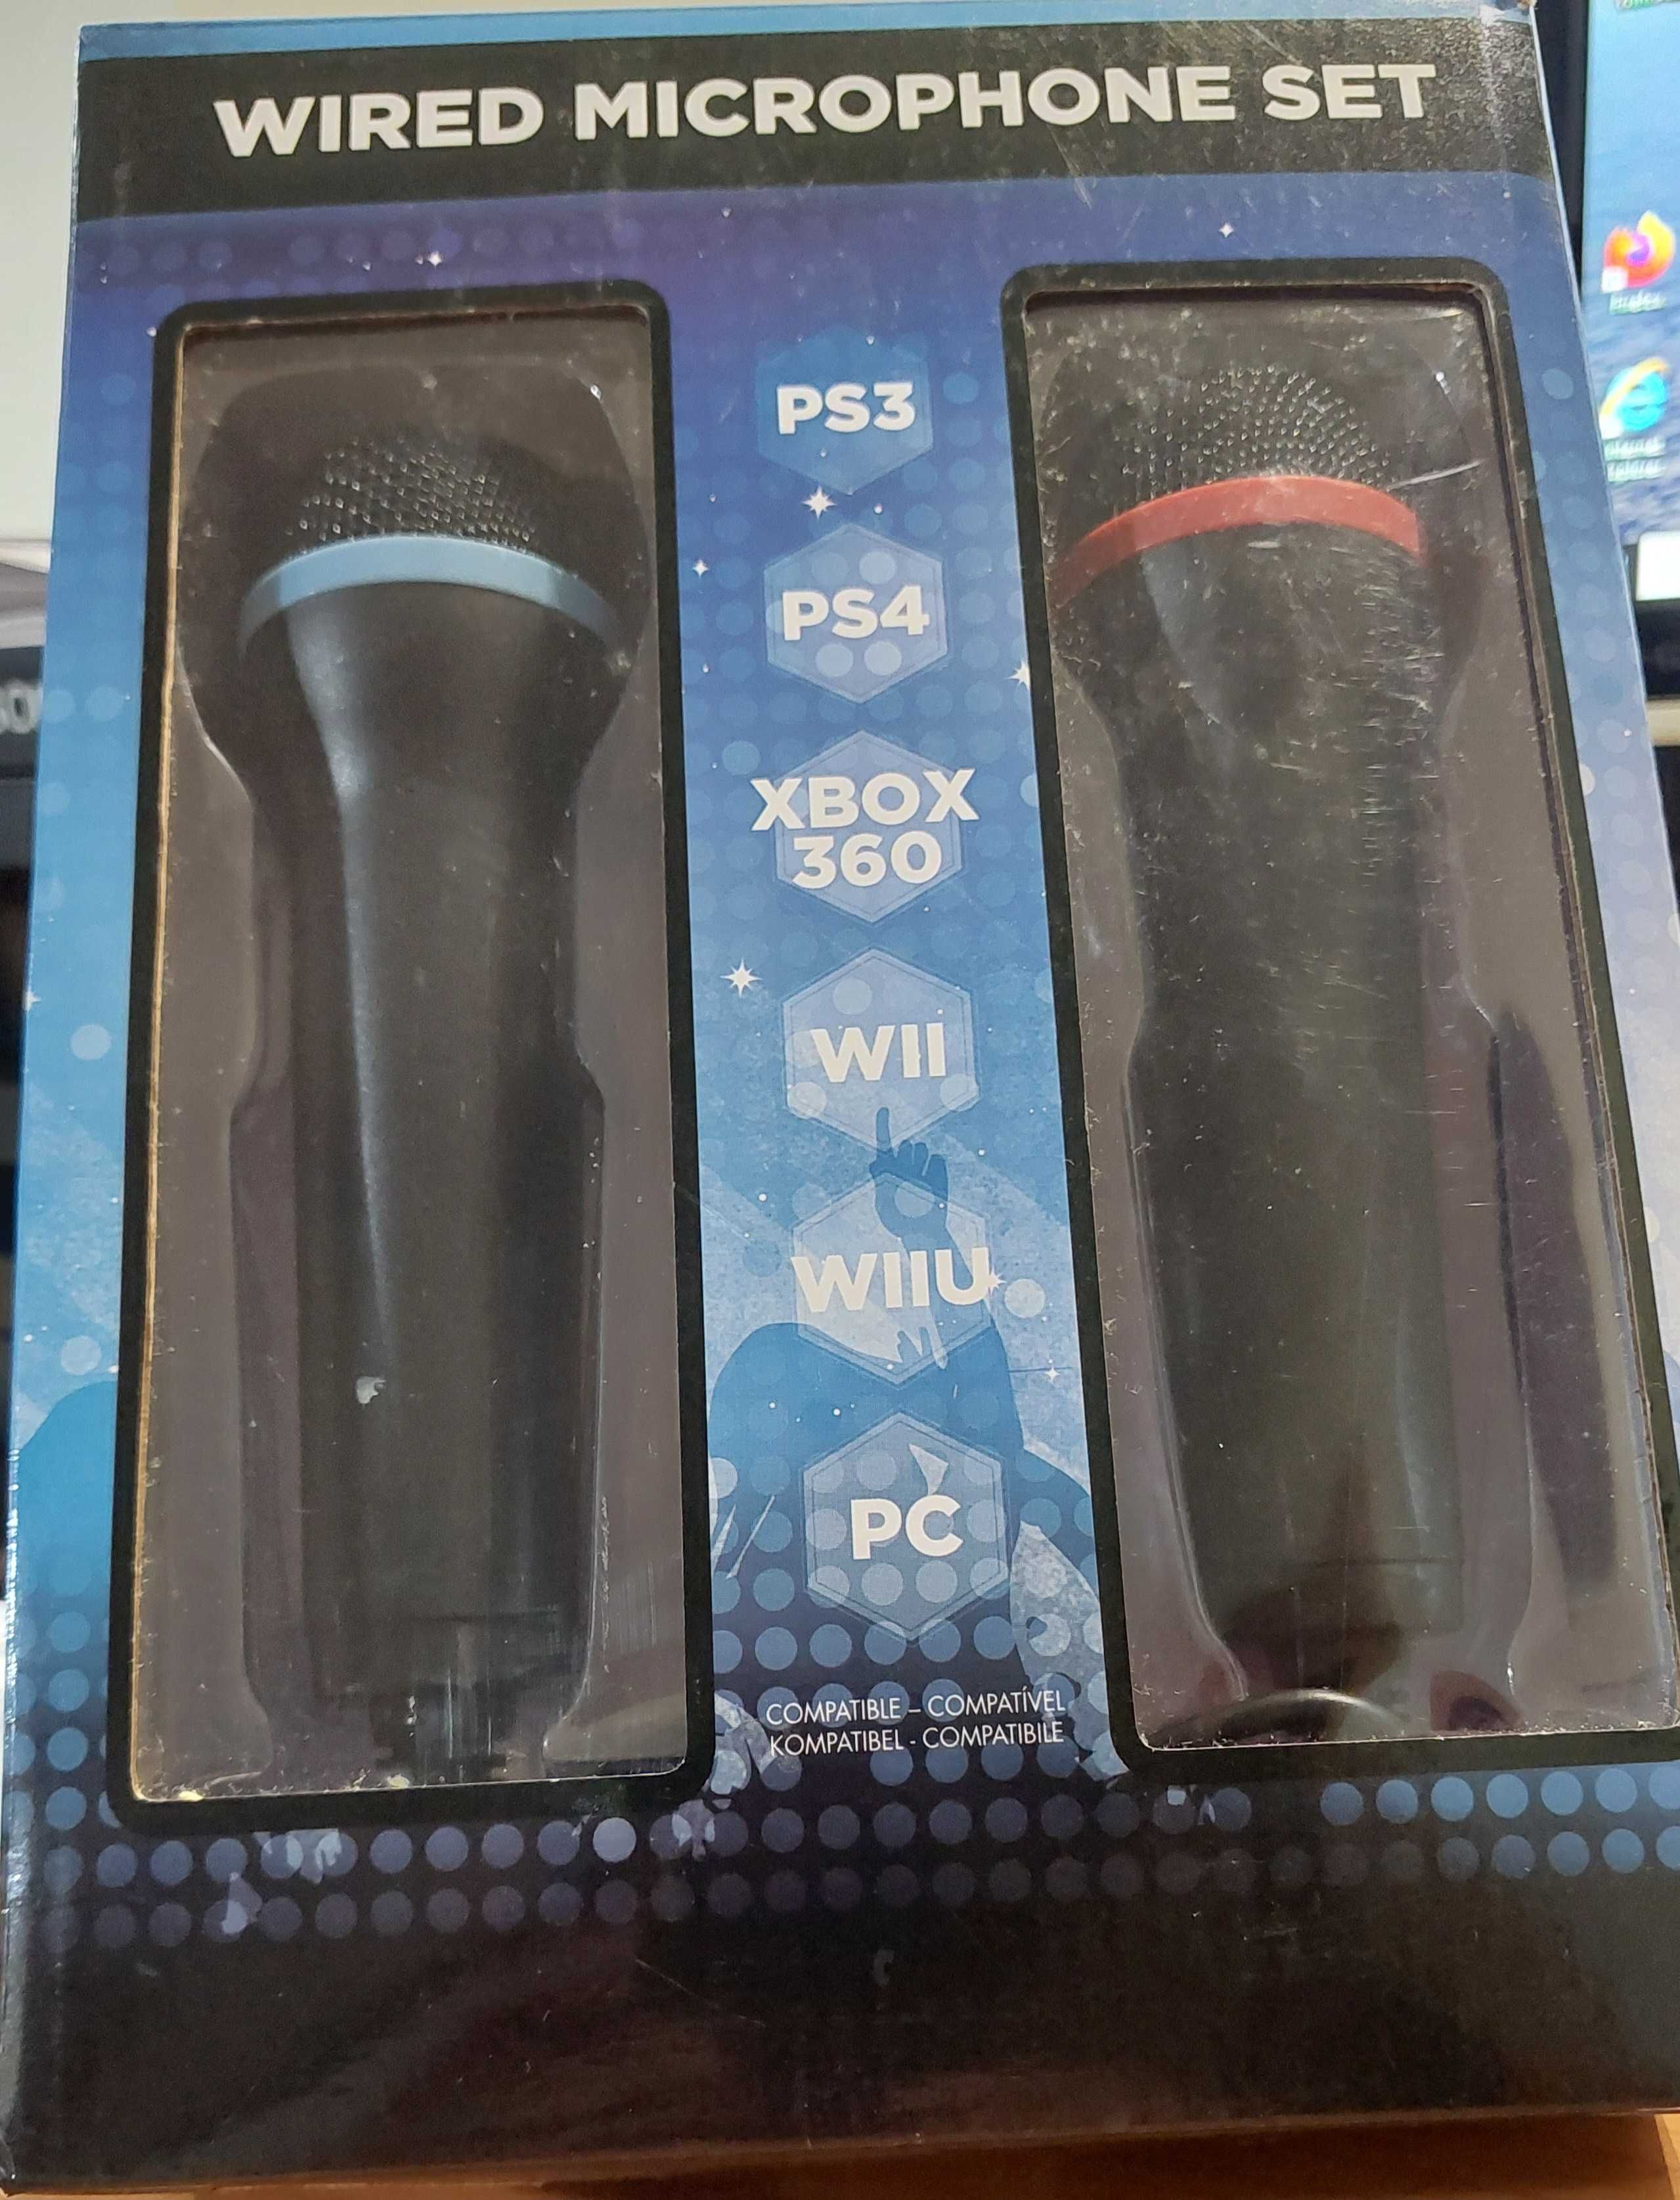 2x Microfone Wired set WII PS XBOX PC